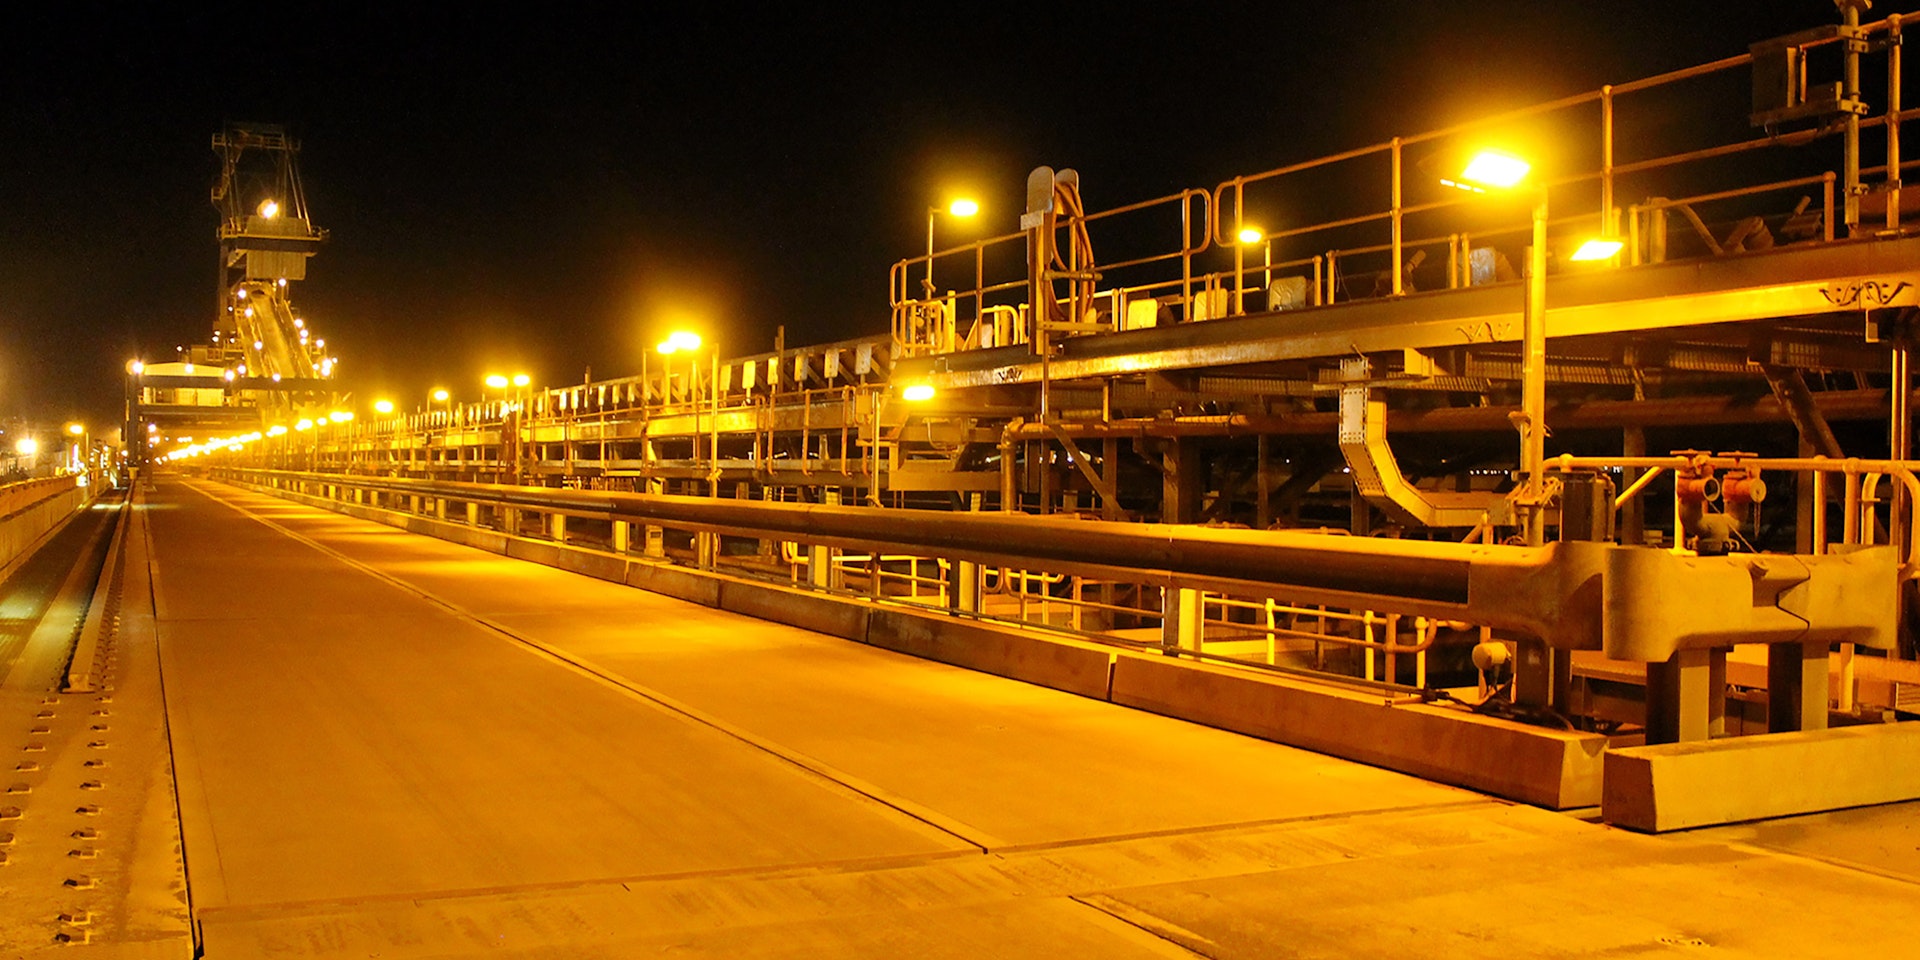 DLK LED Conveyor / Area Light in application, installed on a conveyor on an iron ore mine in bulk port, turtle-friendly amber colour temperature 